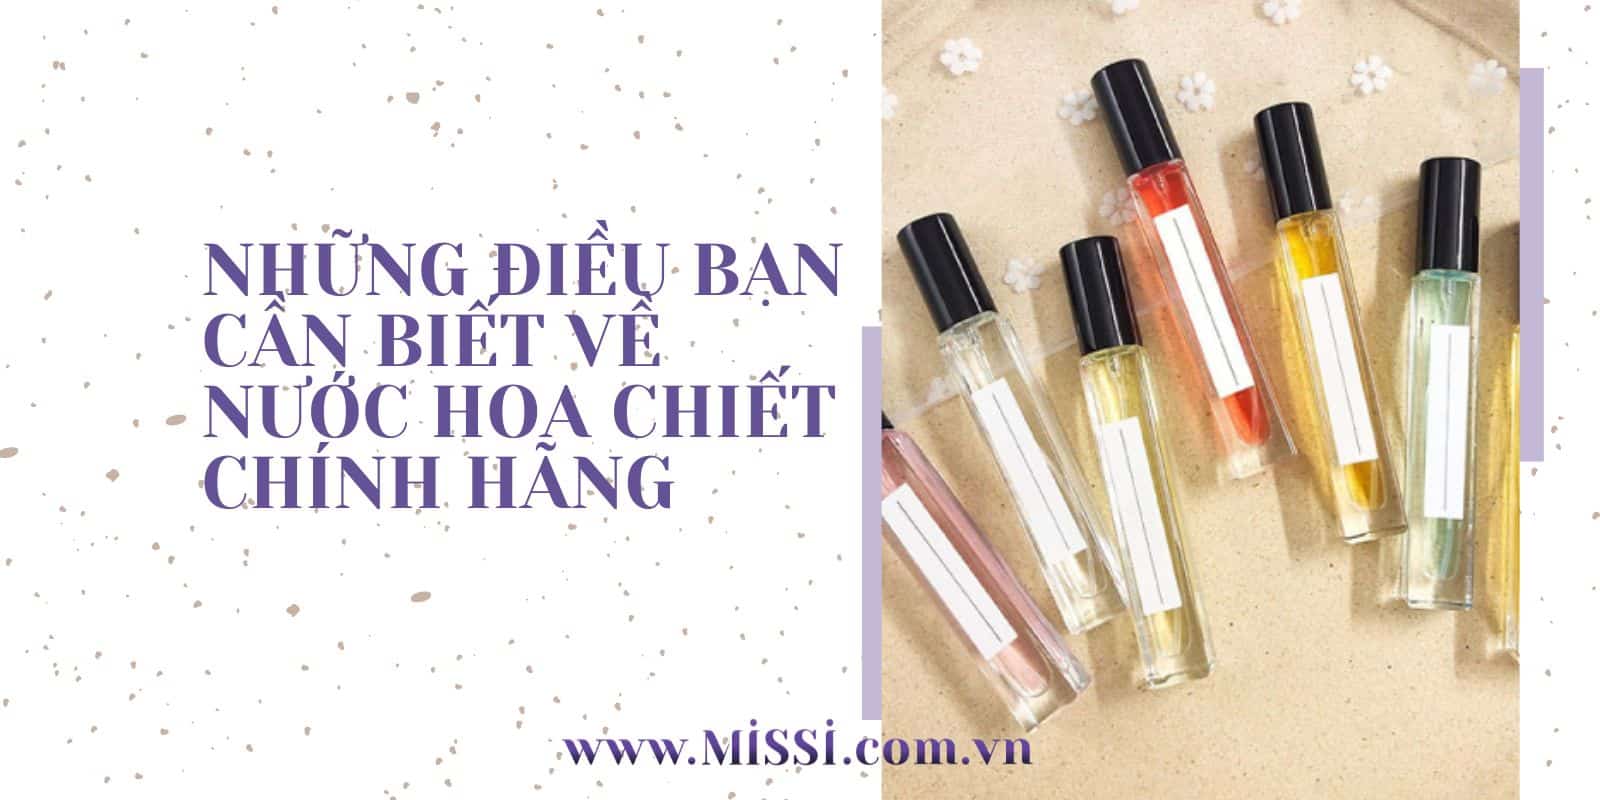 nuoc-hoa-chiet-chinh-hang-1